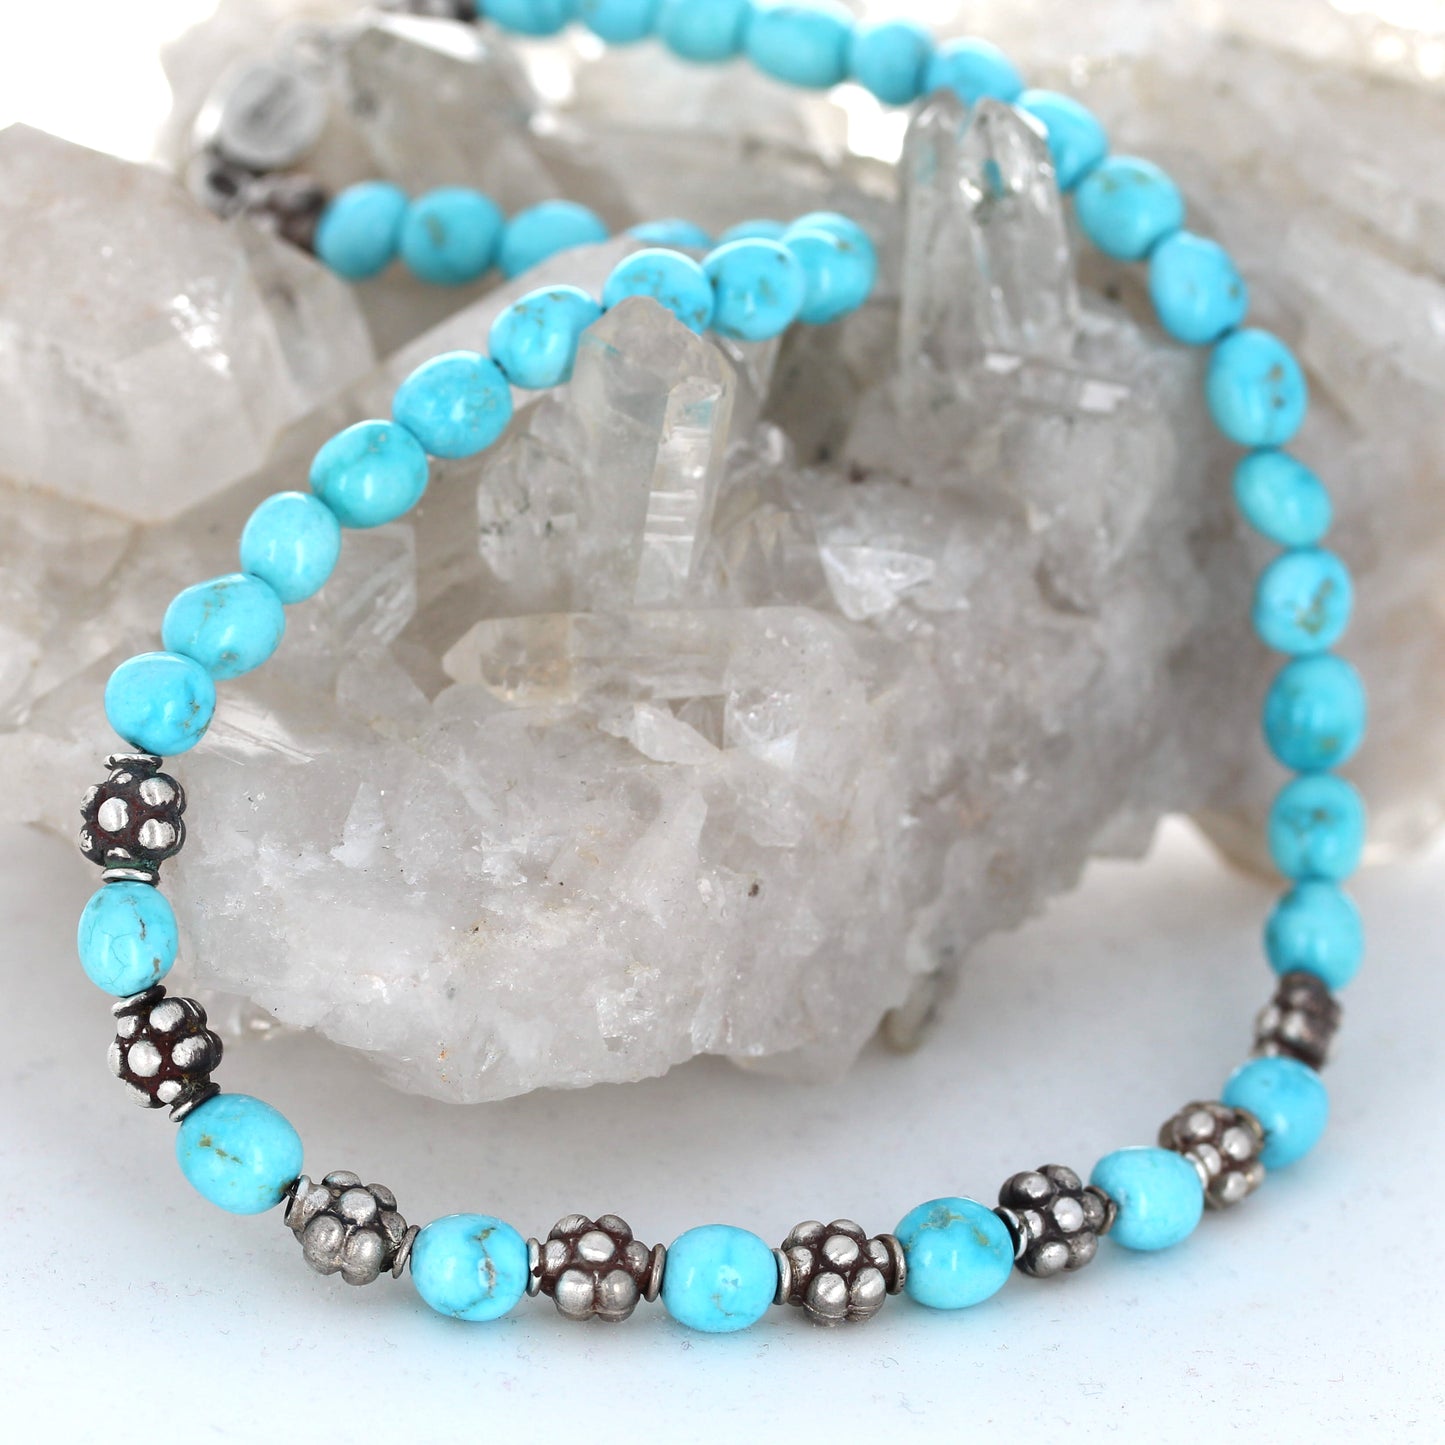 SONORAN ROSE Turquoise Beads Necklace Sterling Silver Exquisite Blue